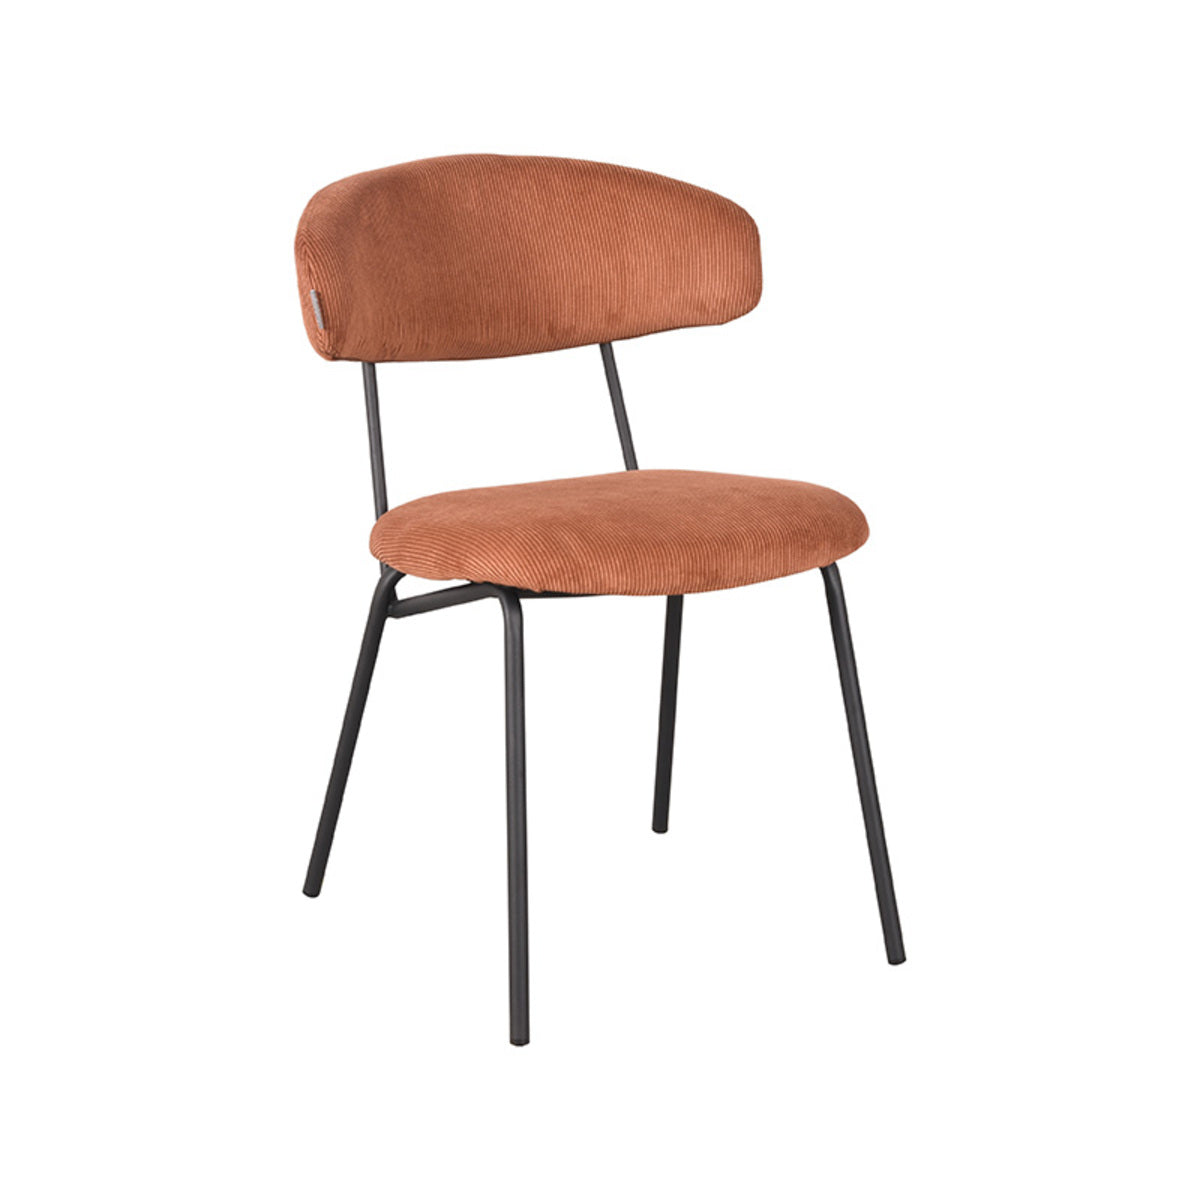 LABEL51 Dining room chair Zack - Rust - Ribcord | 2 pcs